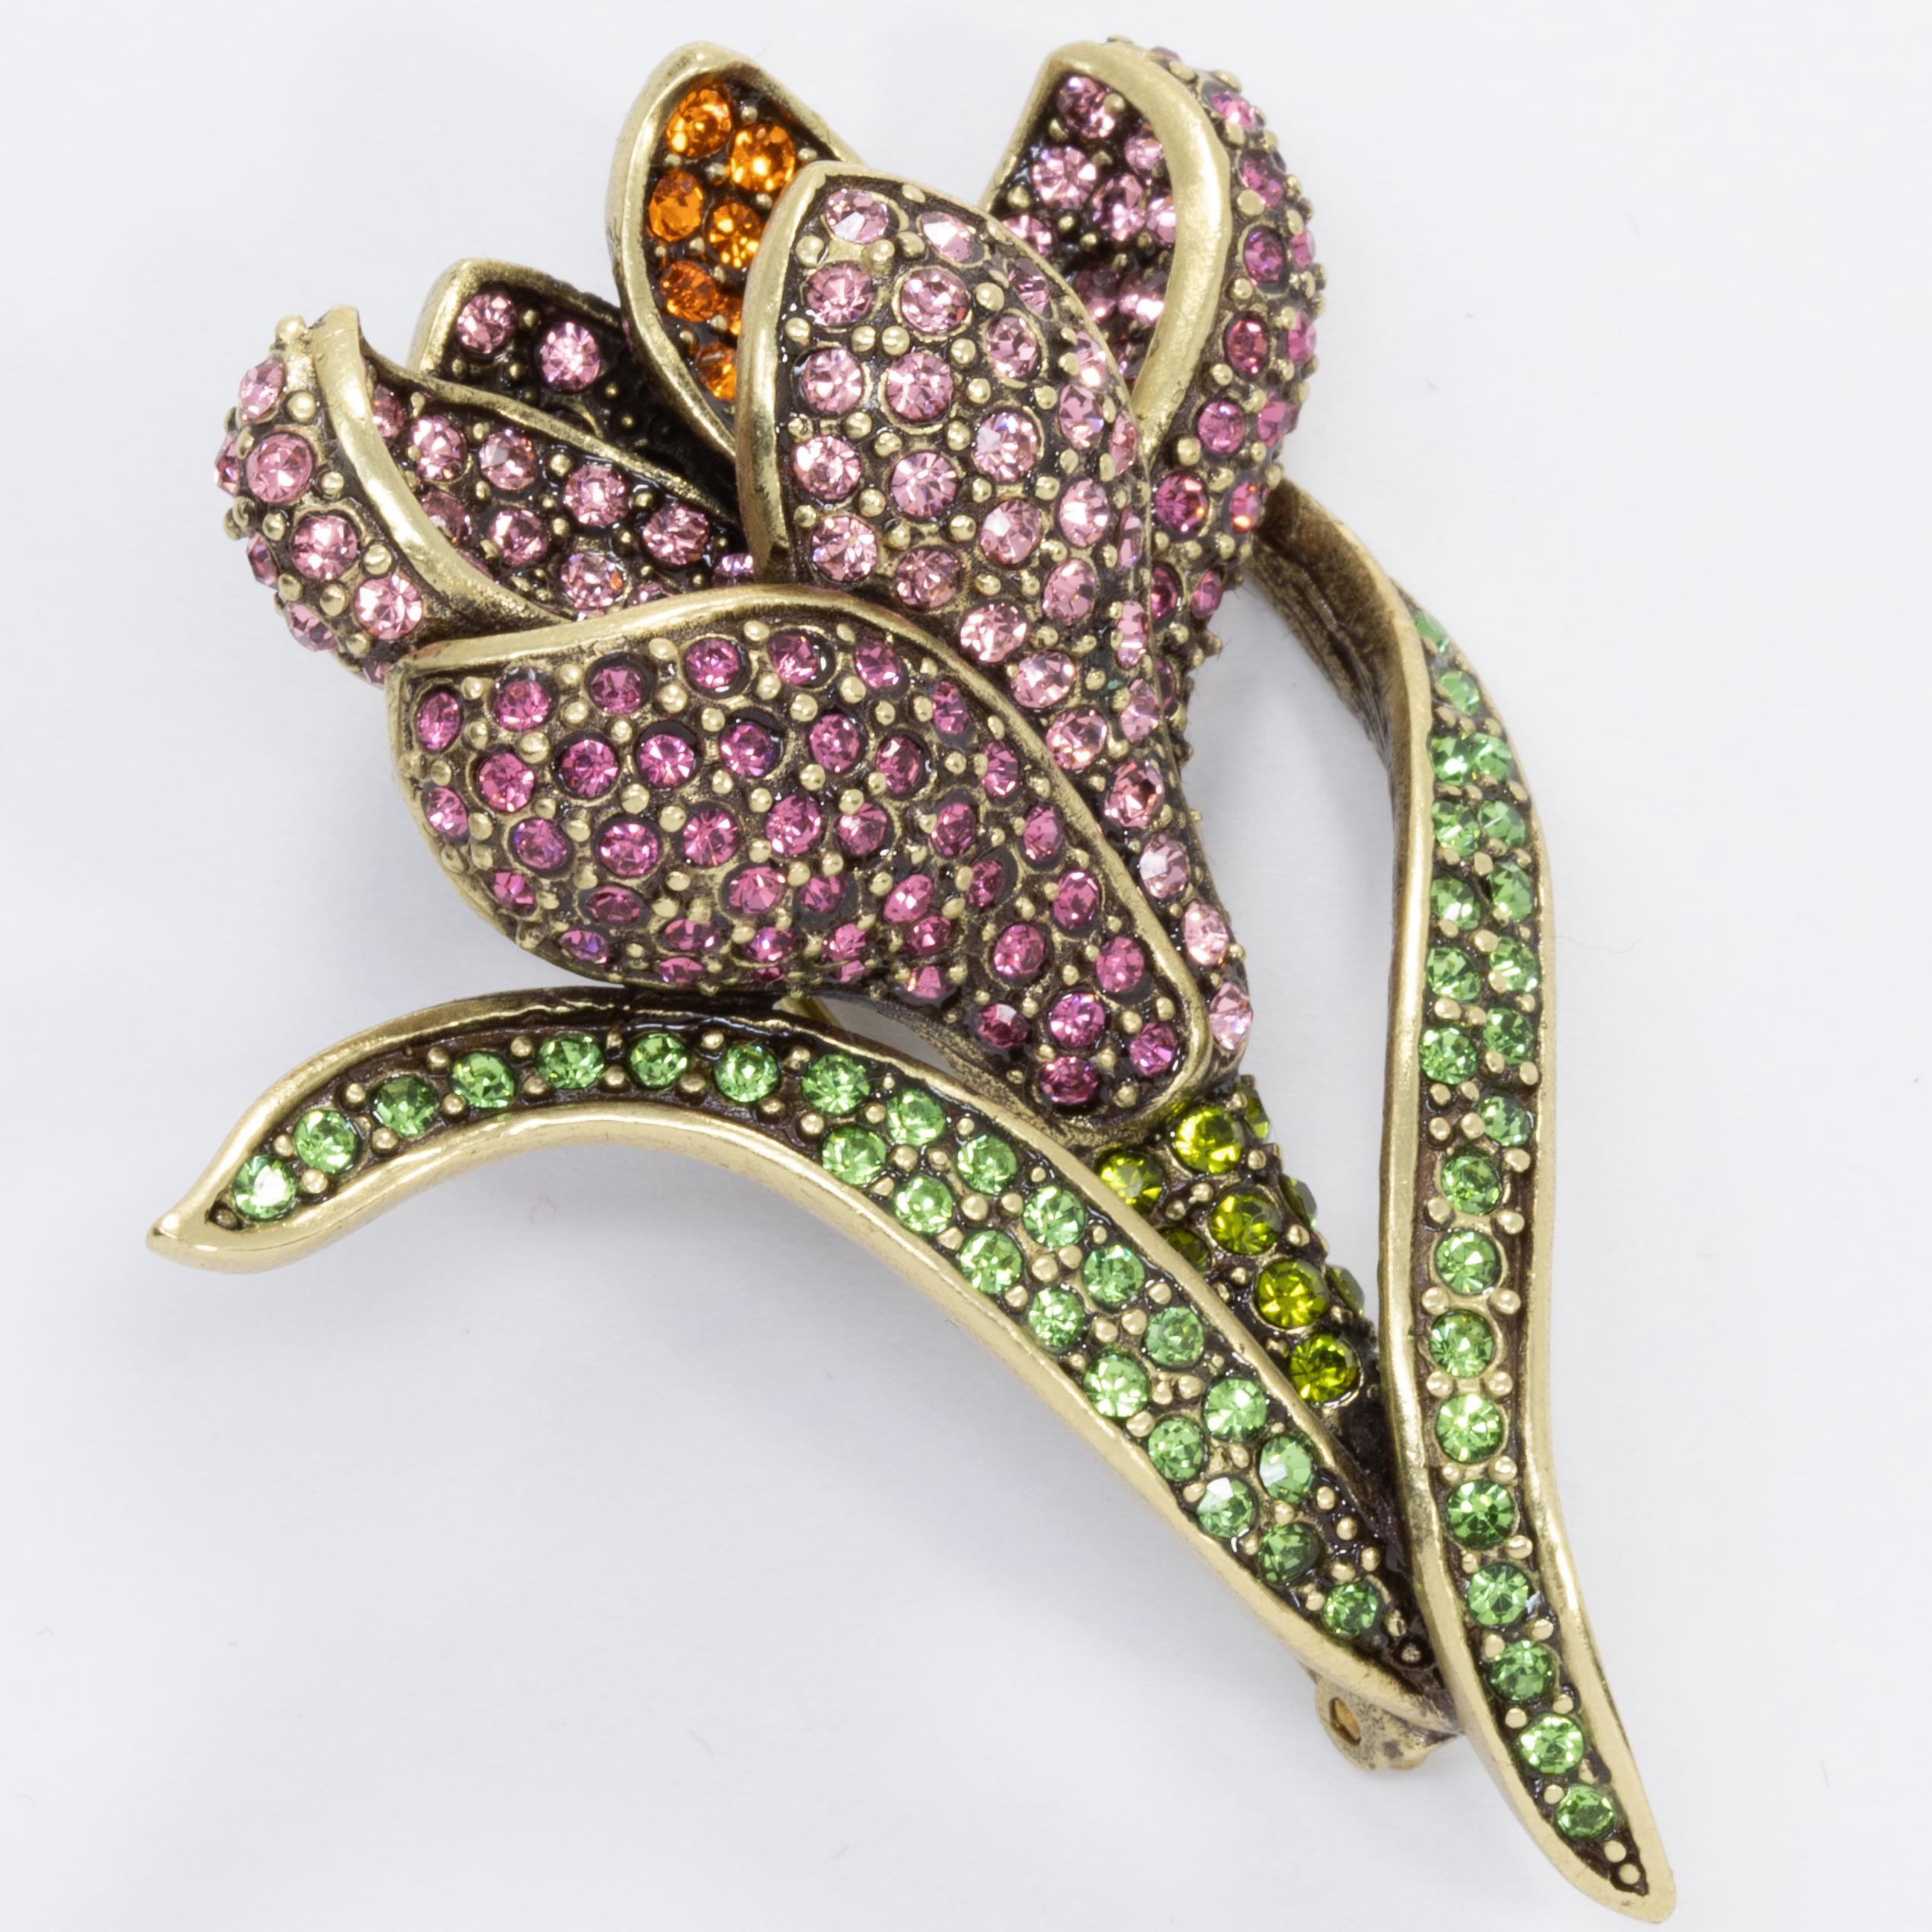 Add an elegant floral touch to your style with this flower brooch from Heidi Daus. Accented with pave rose, peridot, and tangerine crystals, this gorgeous flower pin sparkles like no other!

Limited-time, retired collection.

Hallmarks: Heidi Daus,